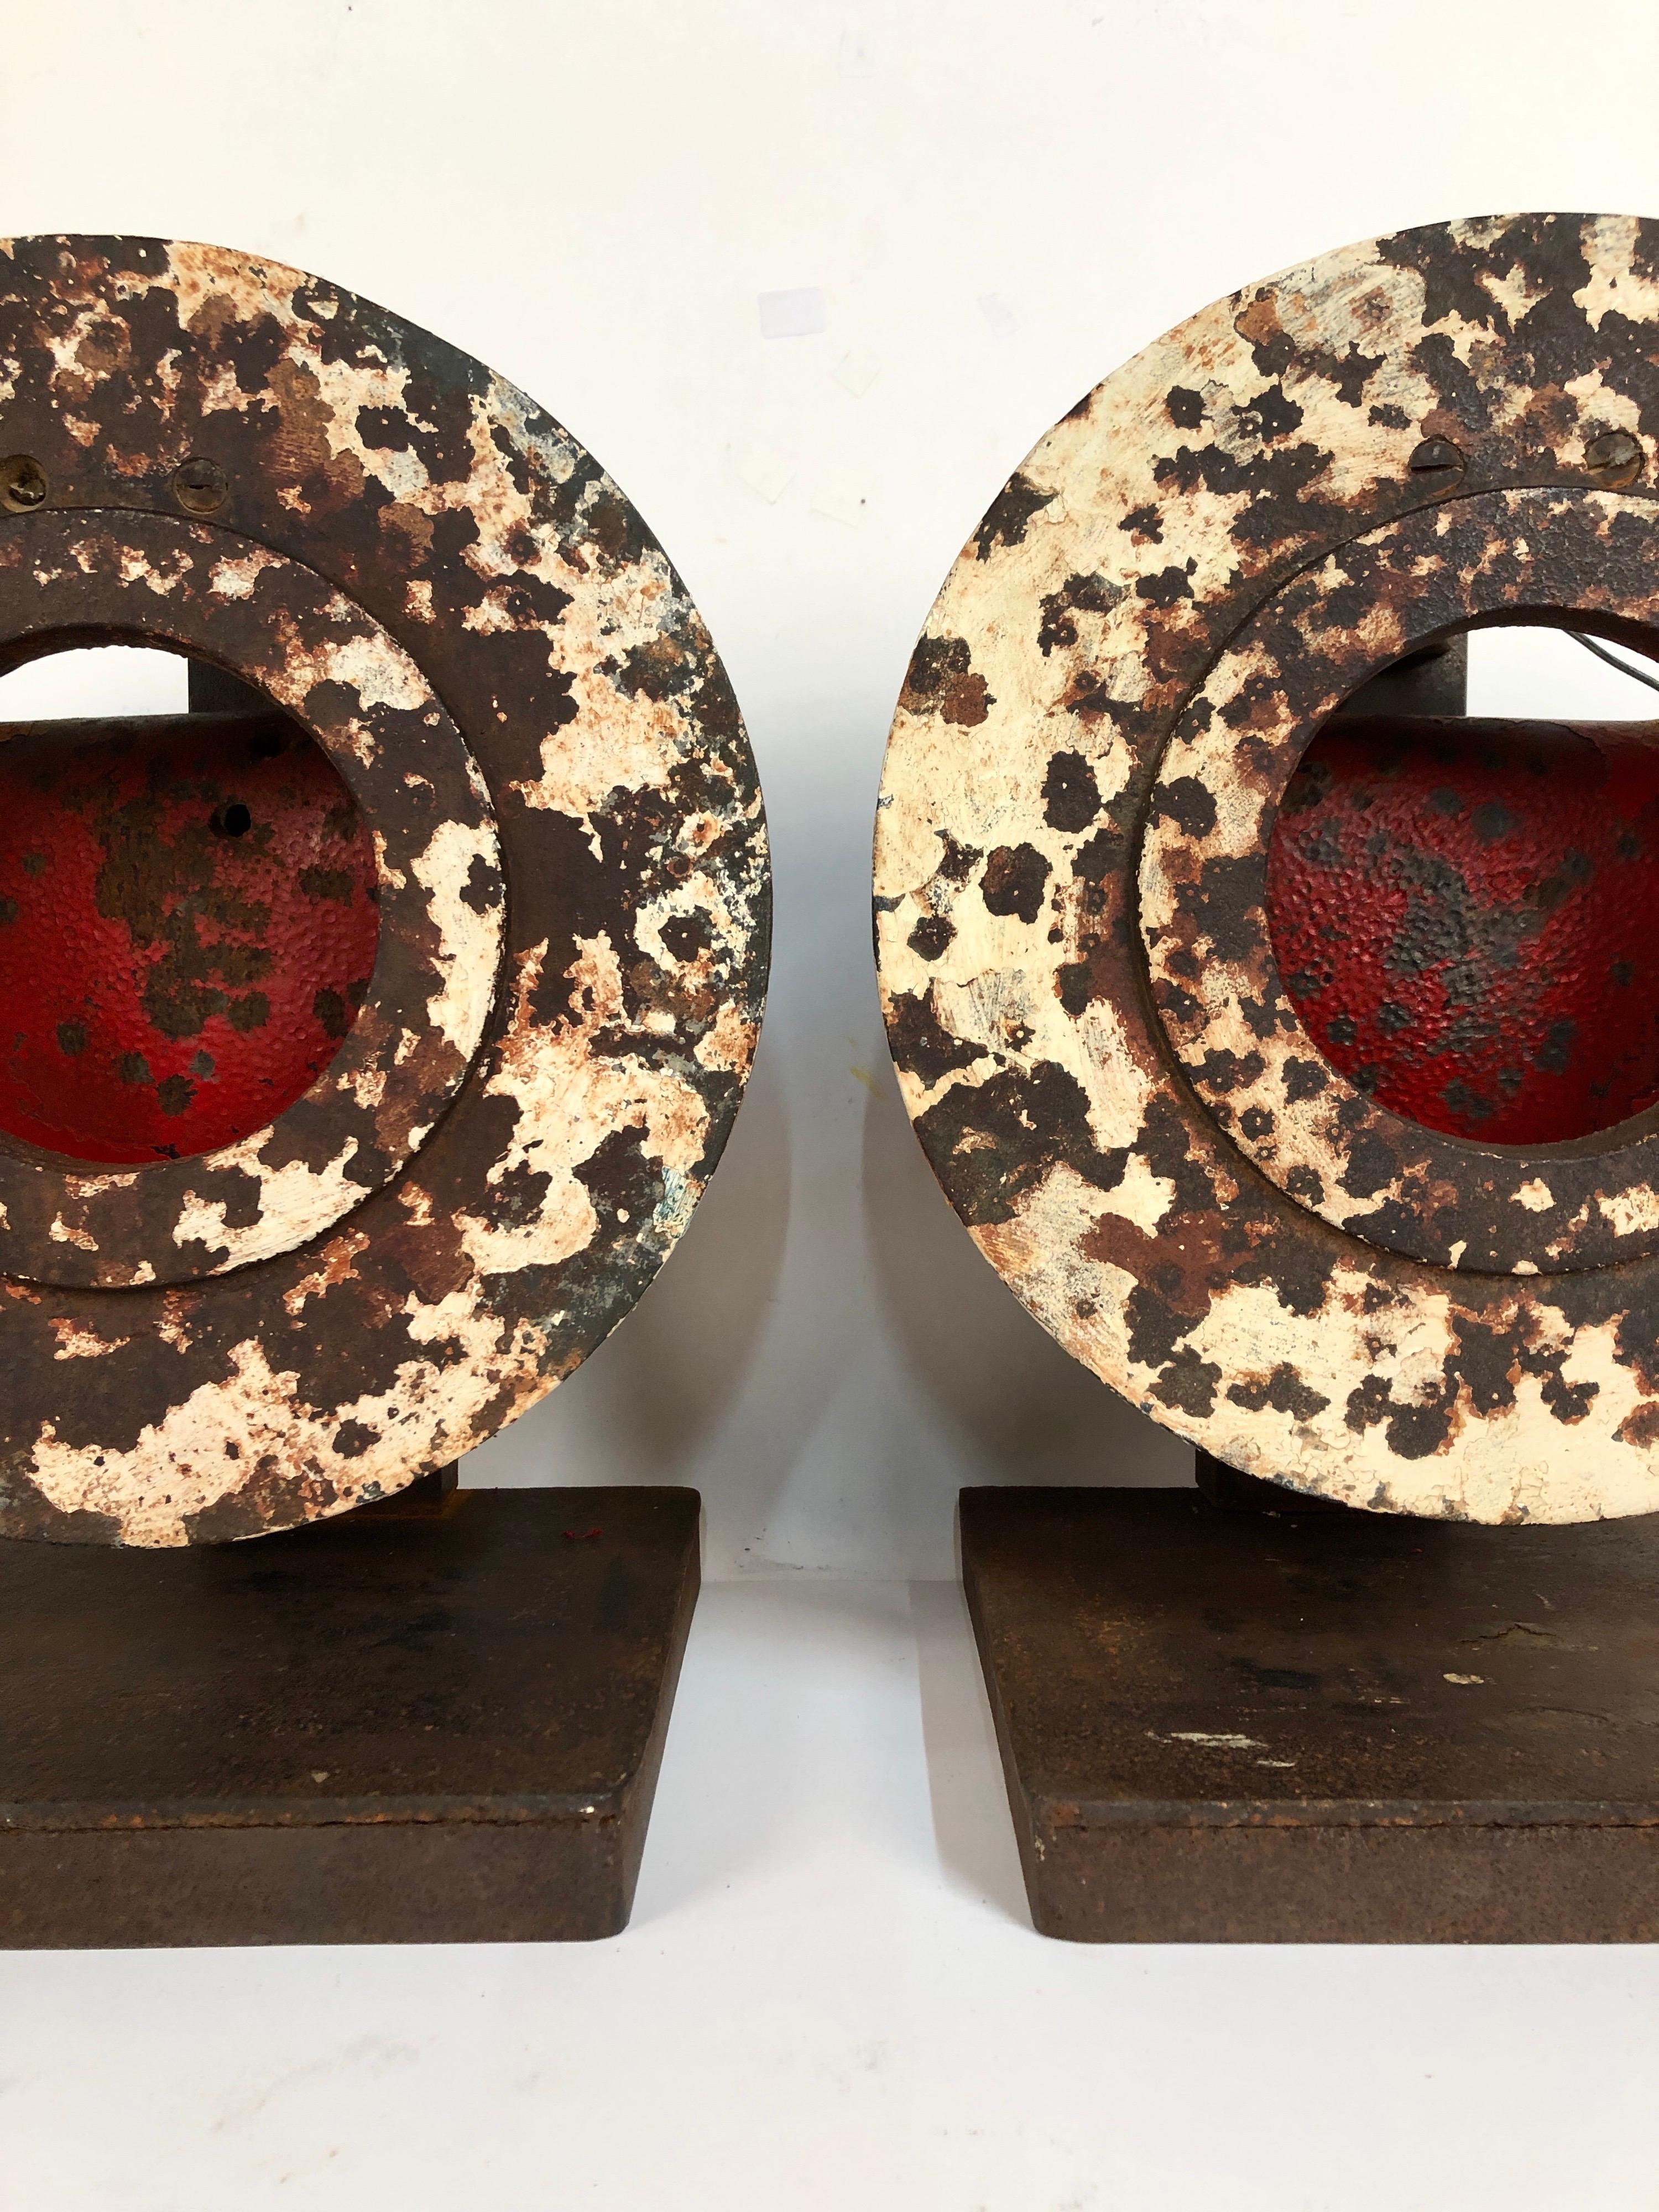 A matching pair of antique cast iron shooting gallery targets with original untouched surface. Great contrast in white paint against shot marks and rich red colored strike plate. Each one weighs 30 pounds. Very graphic pair.